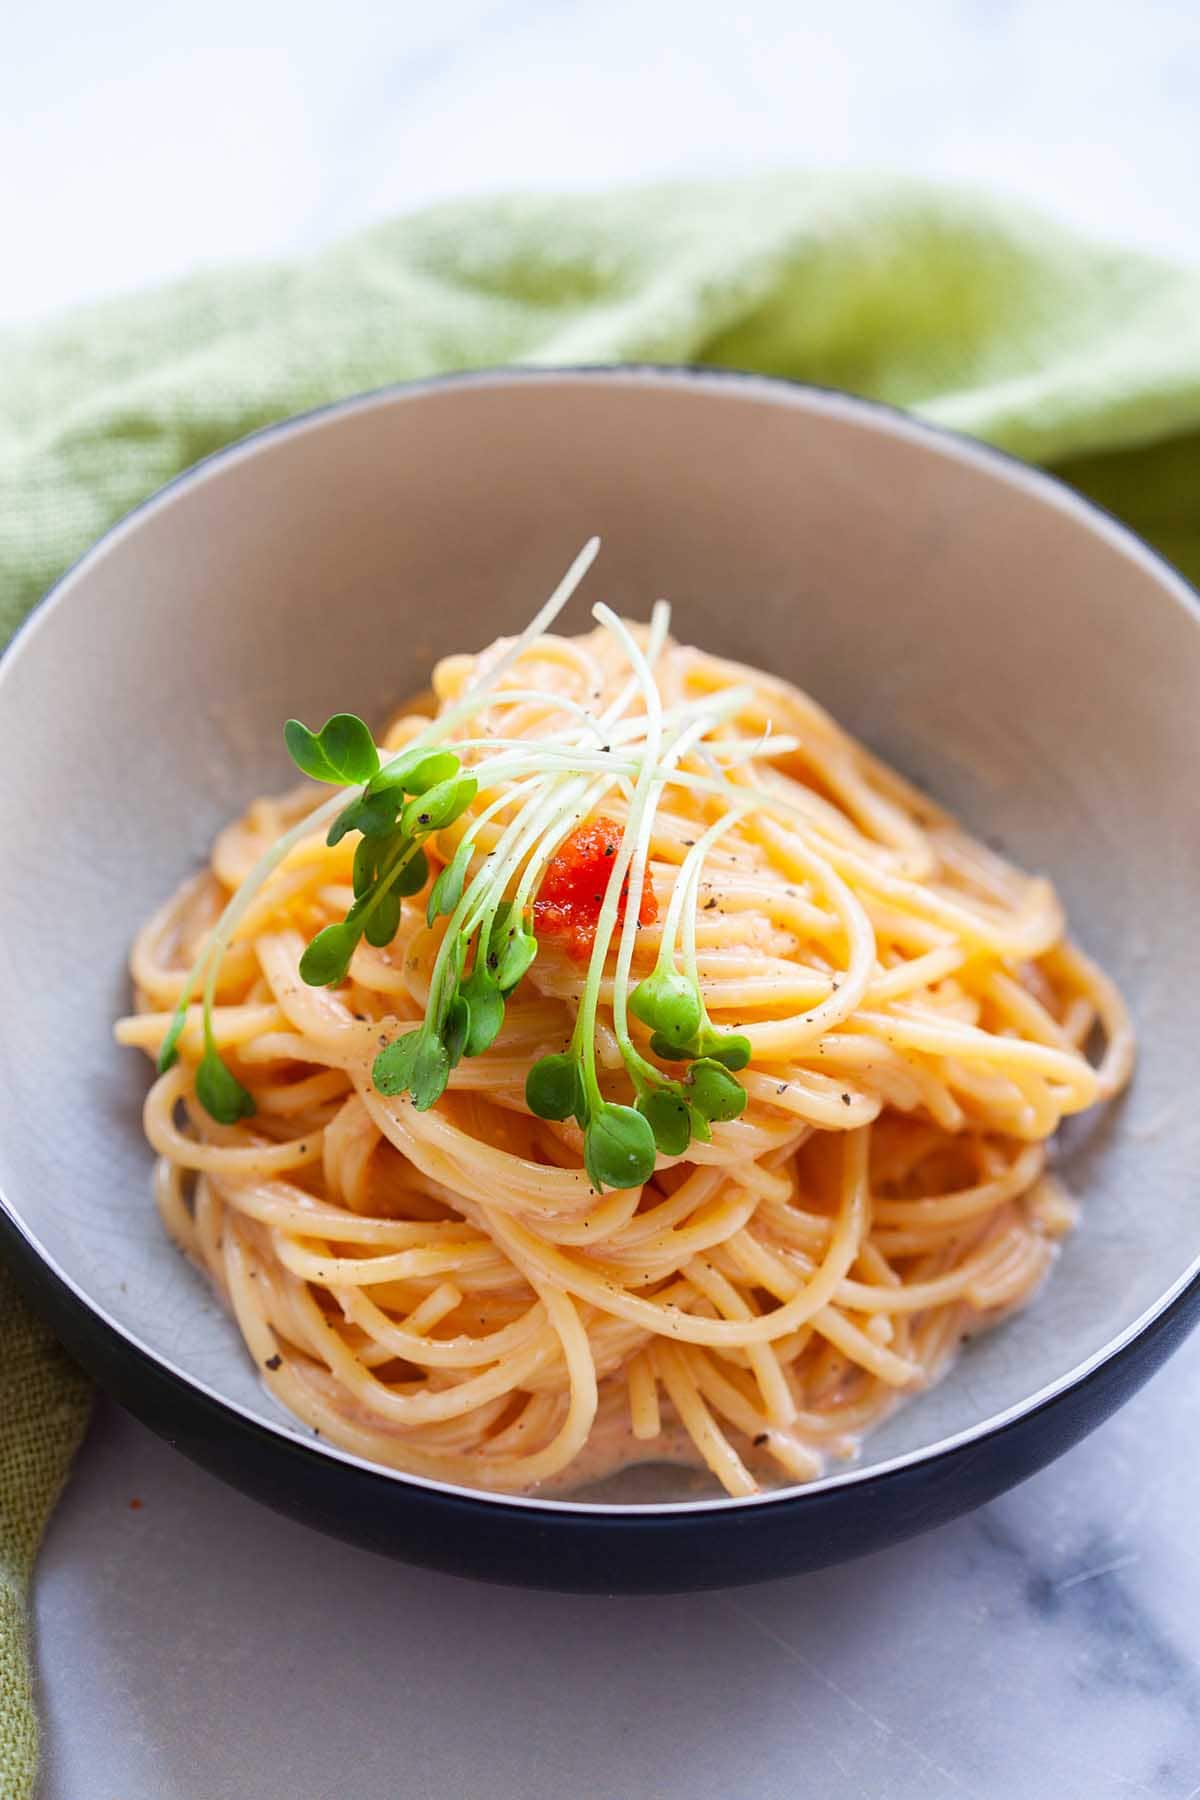 Pasta covered in Mentaiko sauce topped with Mentaiko spicy pollock caviar and microgreen.